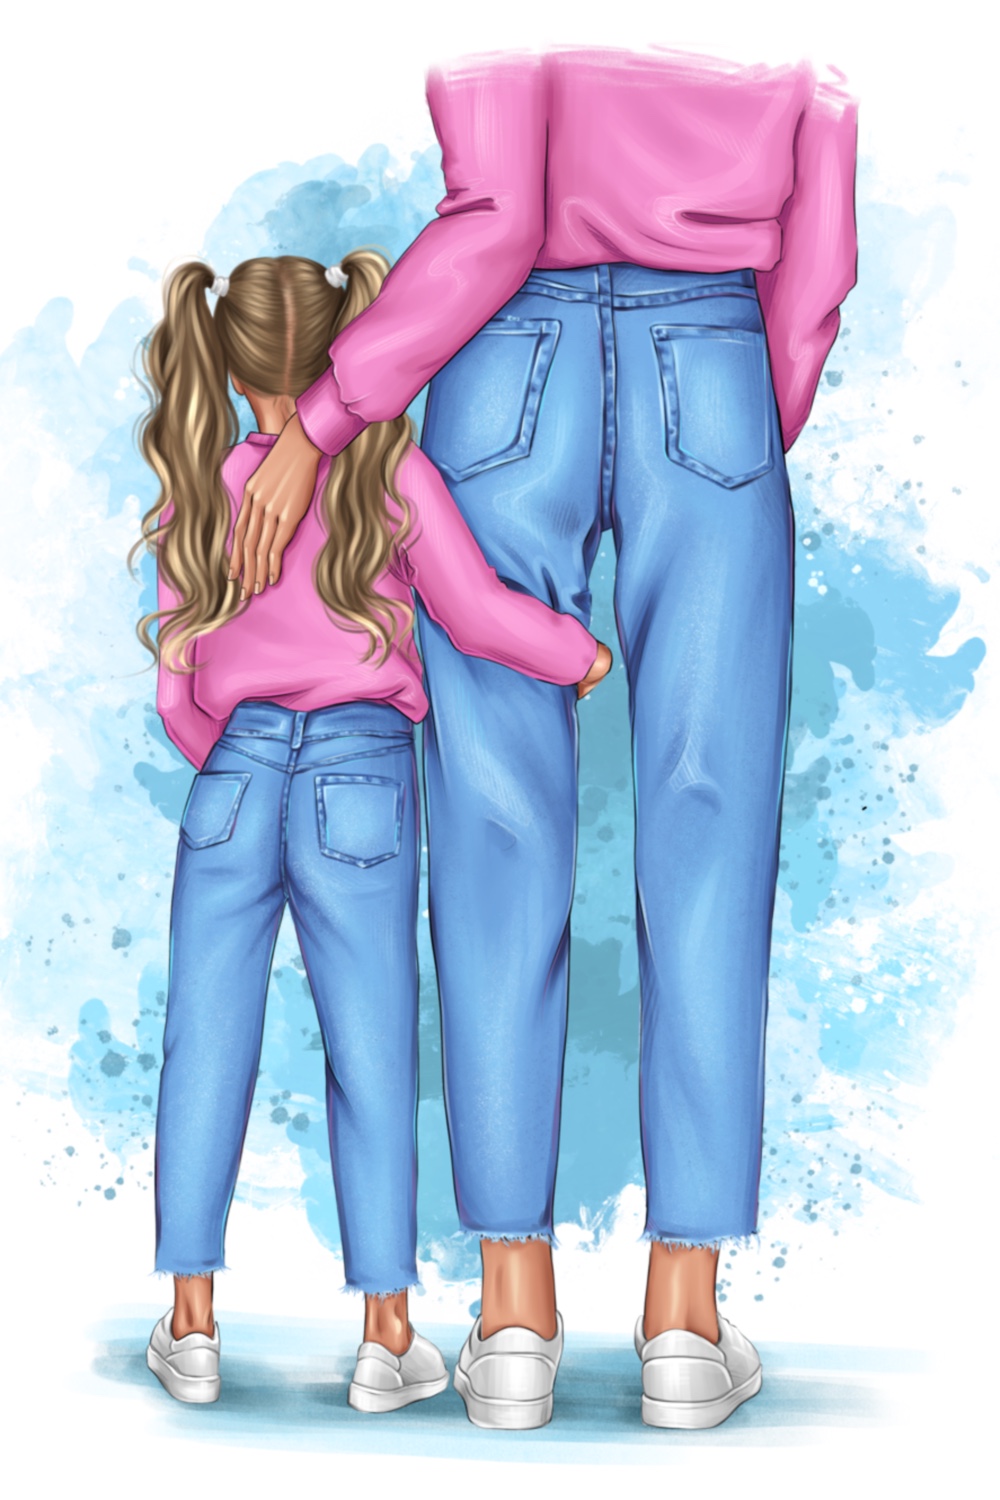 Mom and Daughter Clipart pinterest image.